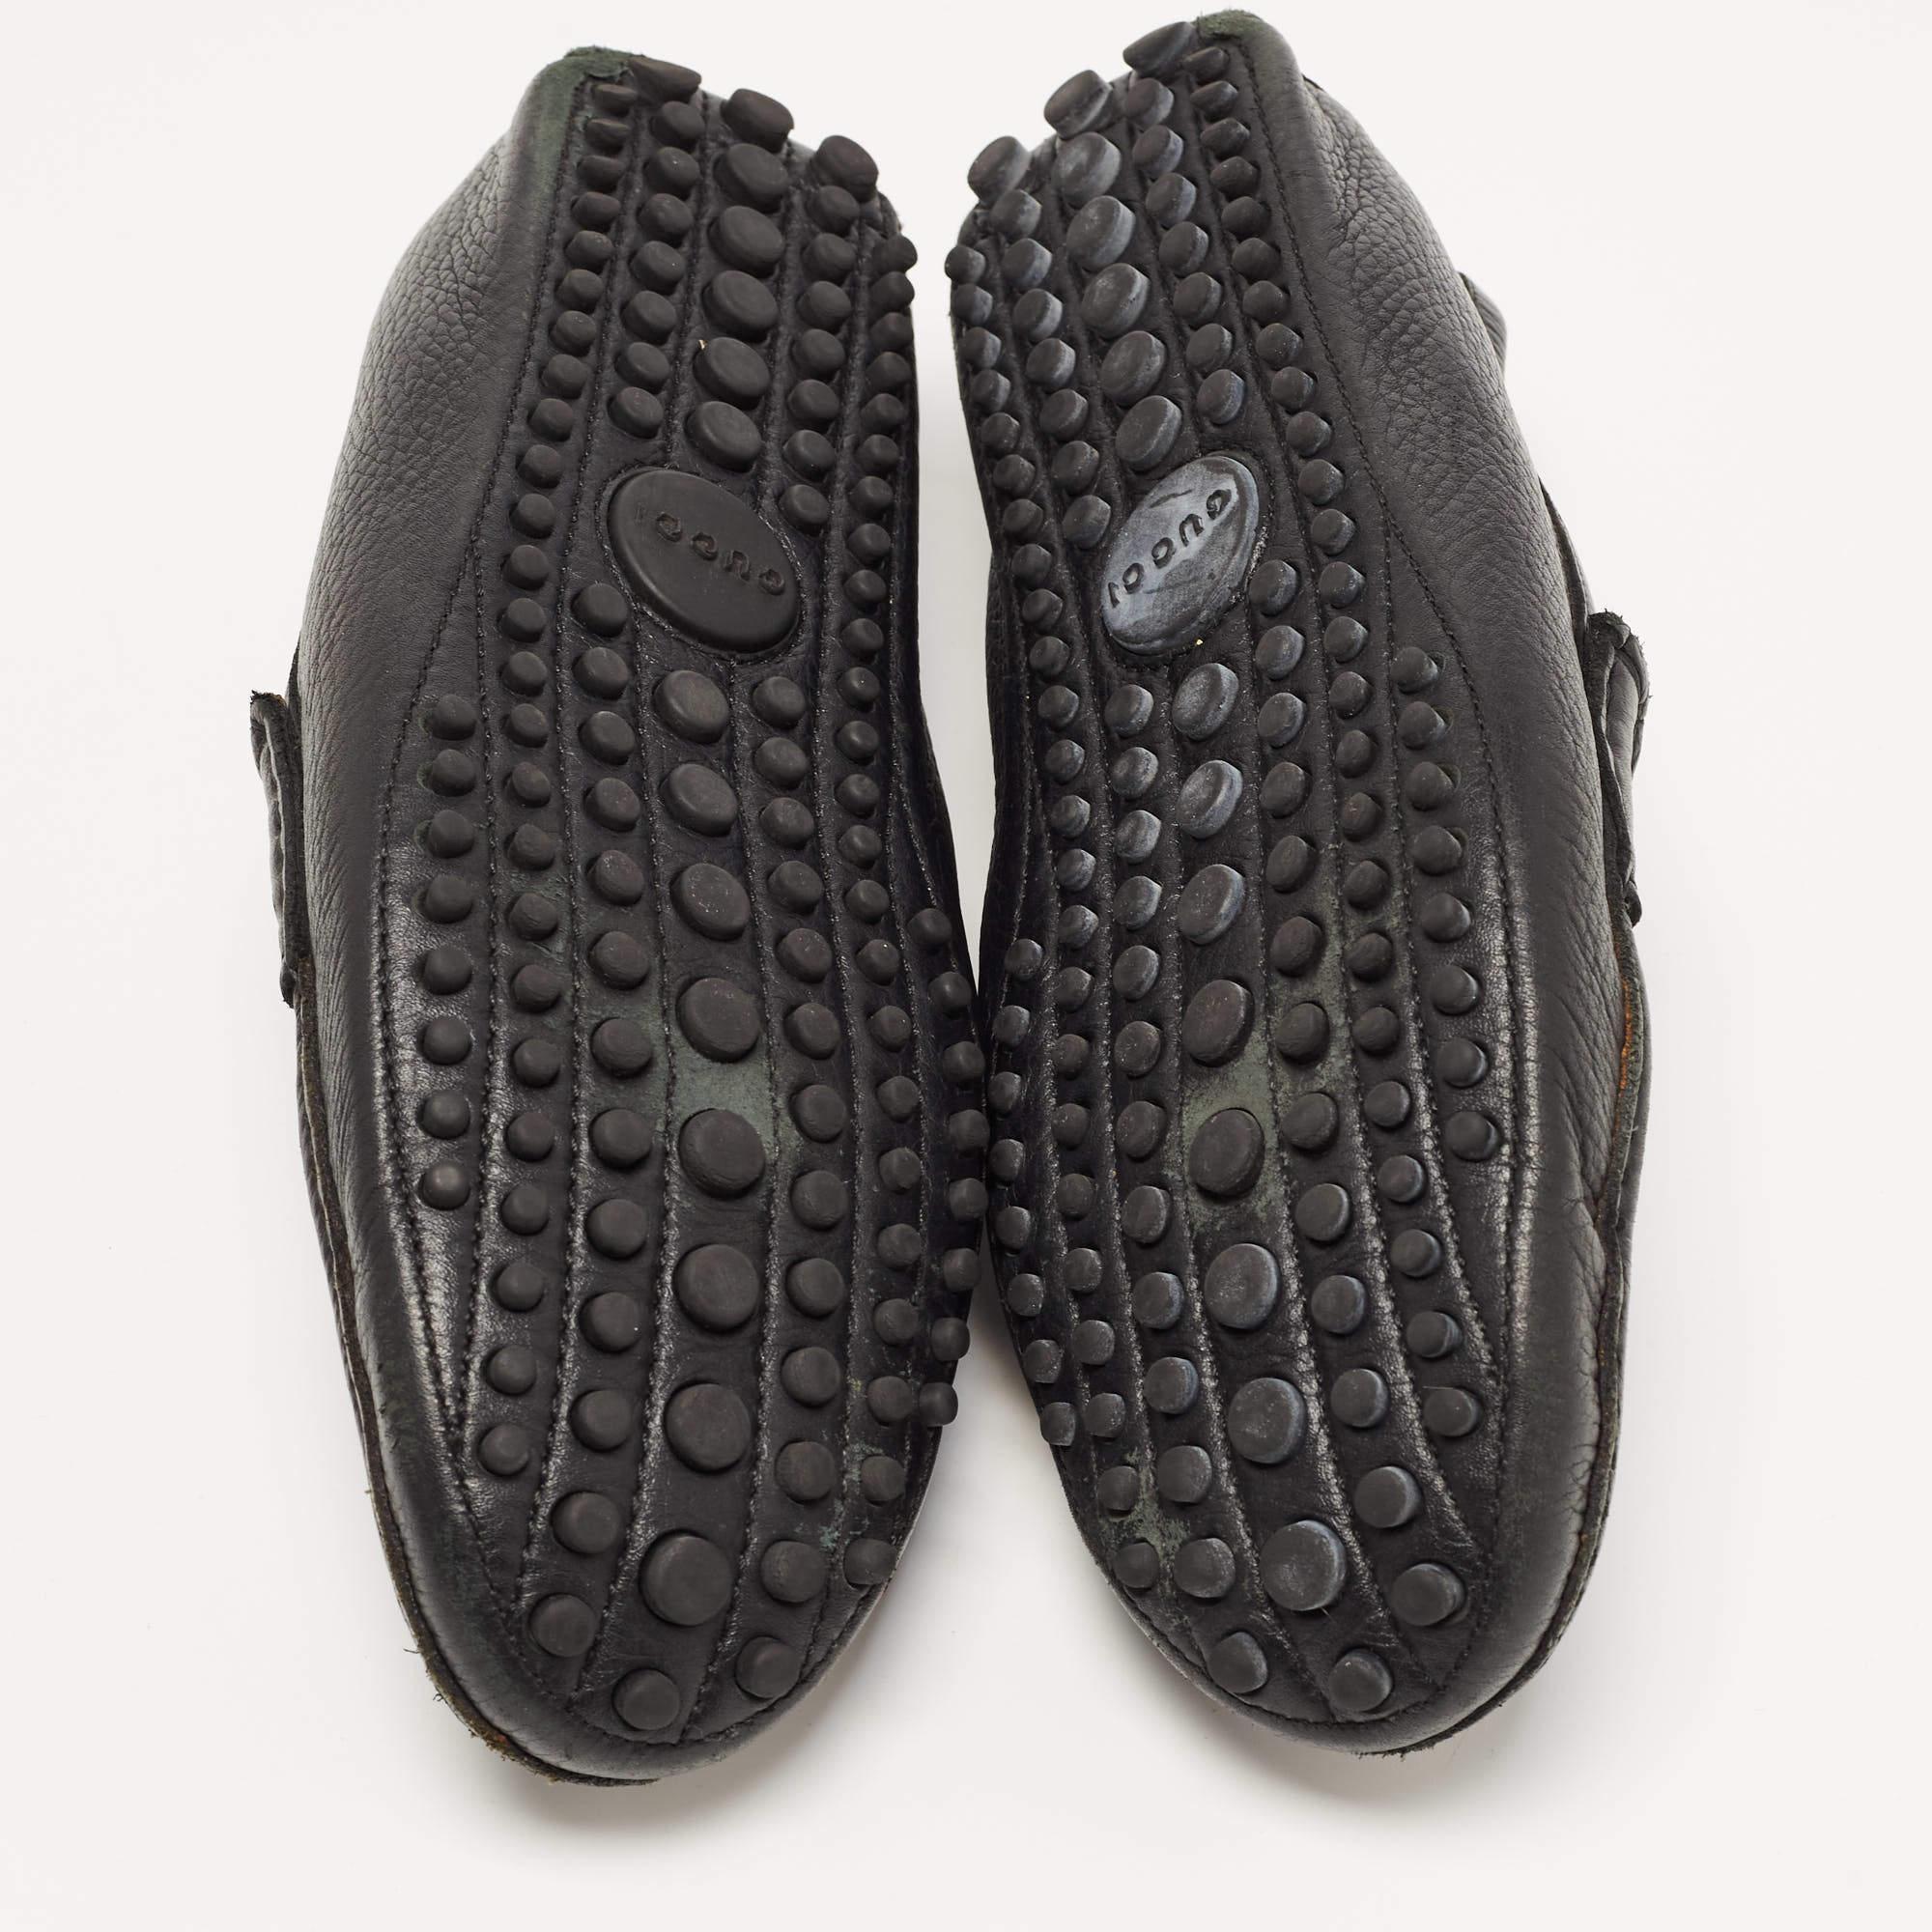 Gucci Black Leather Horsebit Slip On Loafers Size 42 4